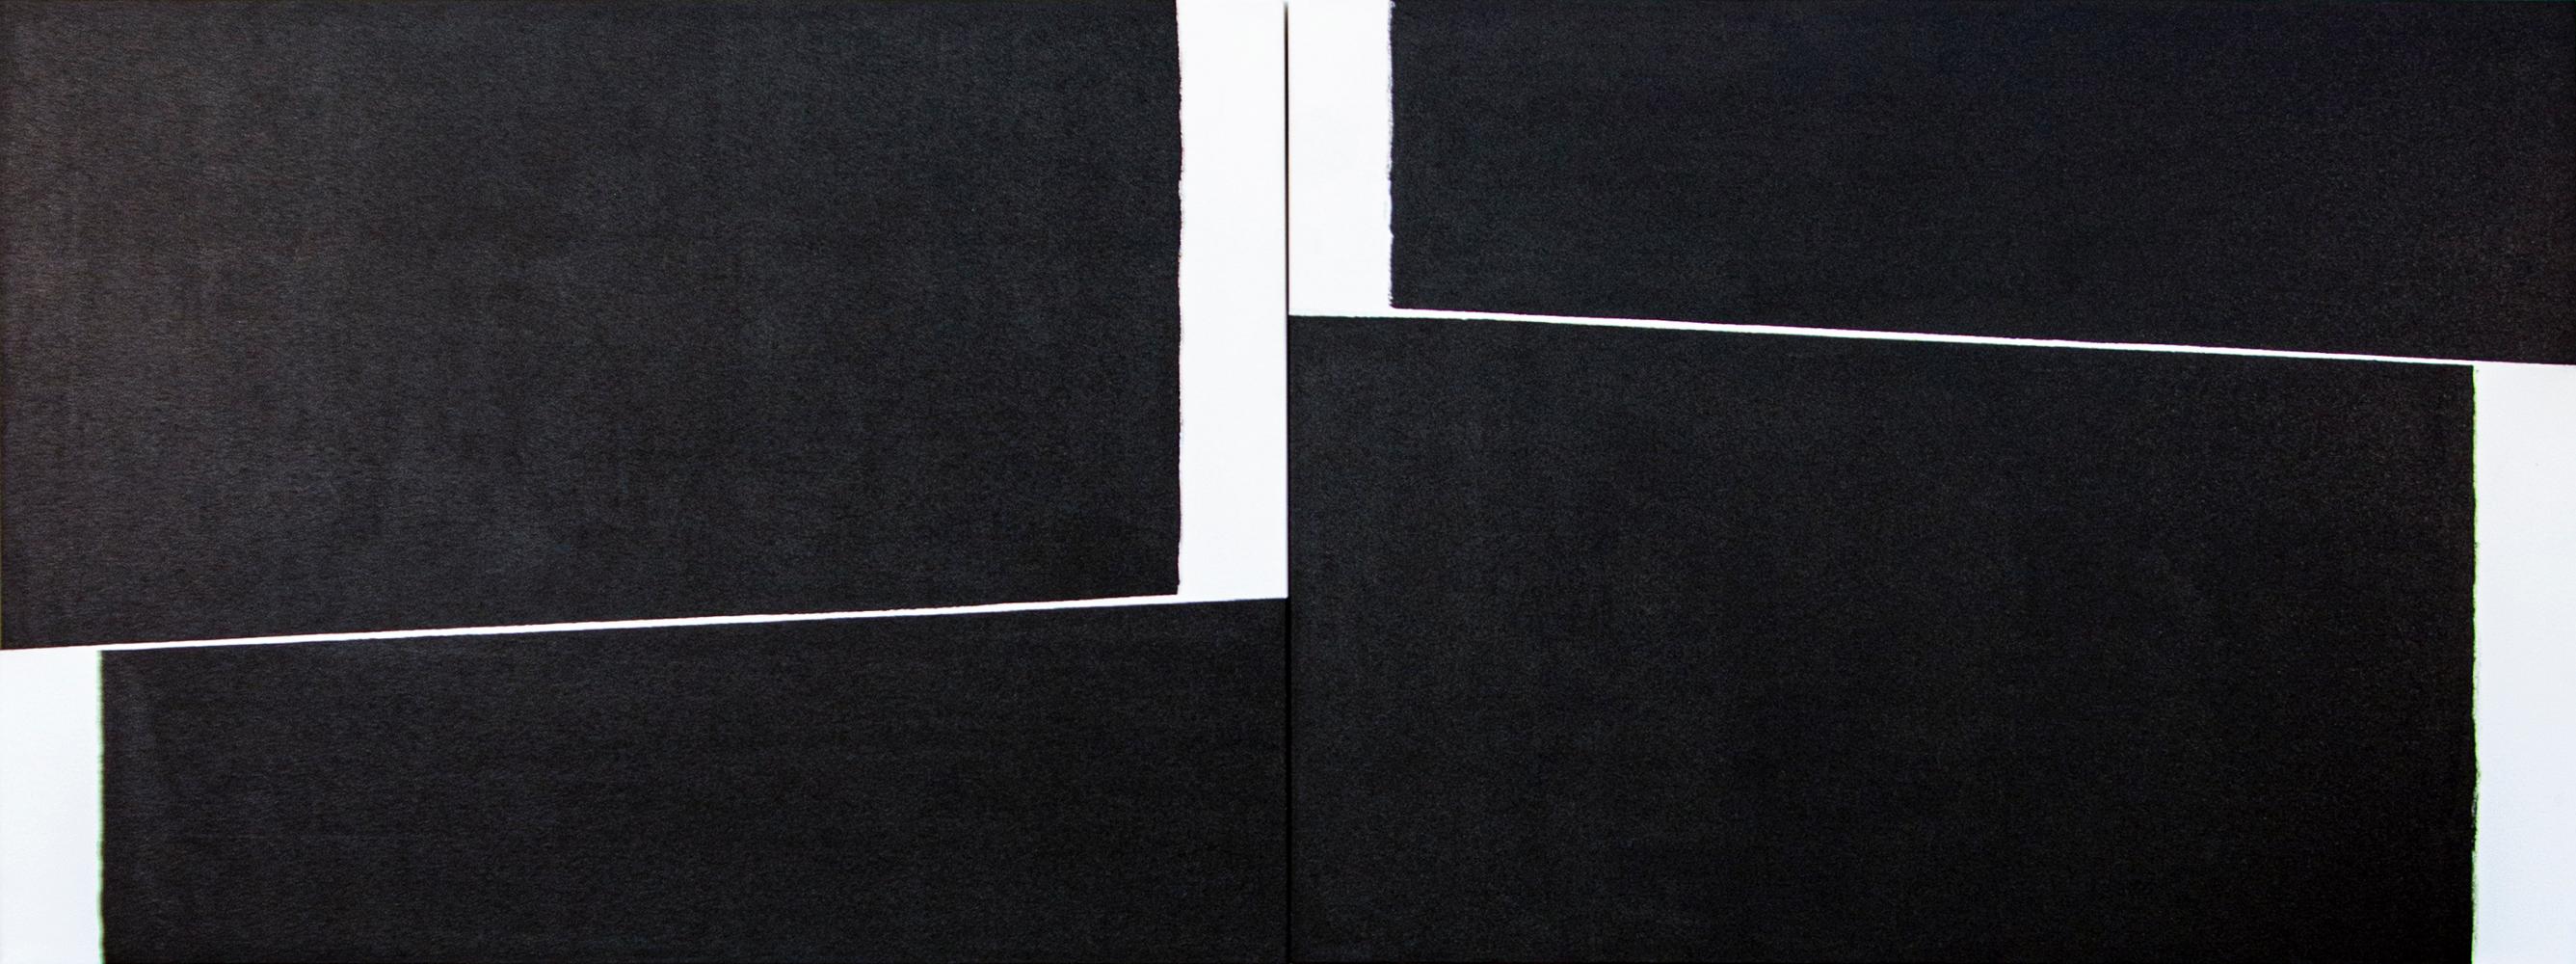 Slope 01 02 - bold, black and white, abstract minimalist, acrylic on canvas - Contemporary Painting by Tim Forbes